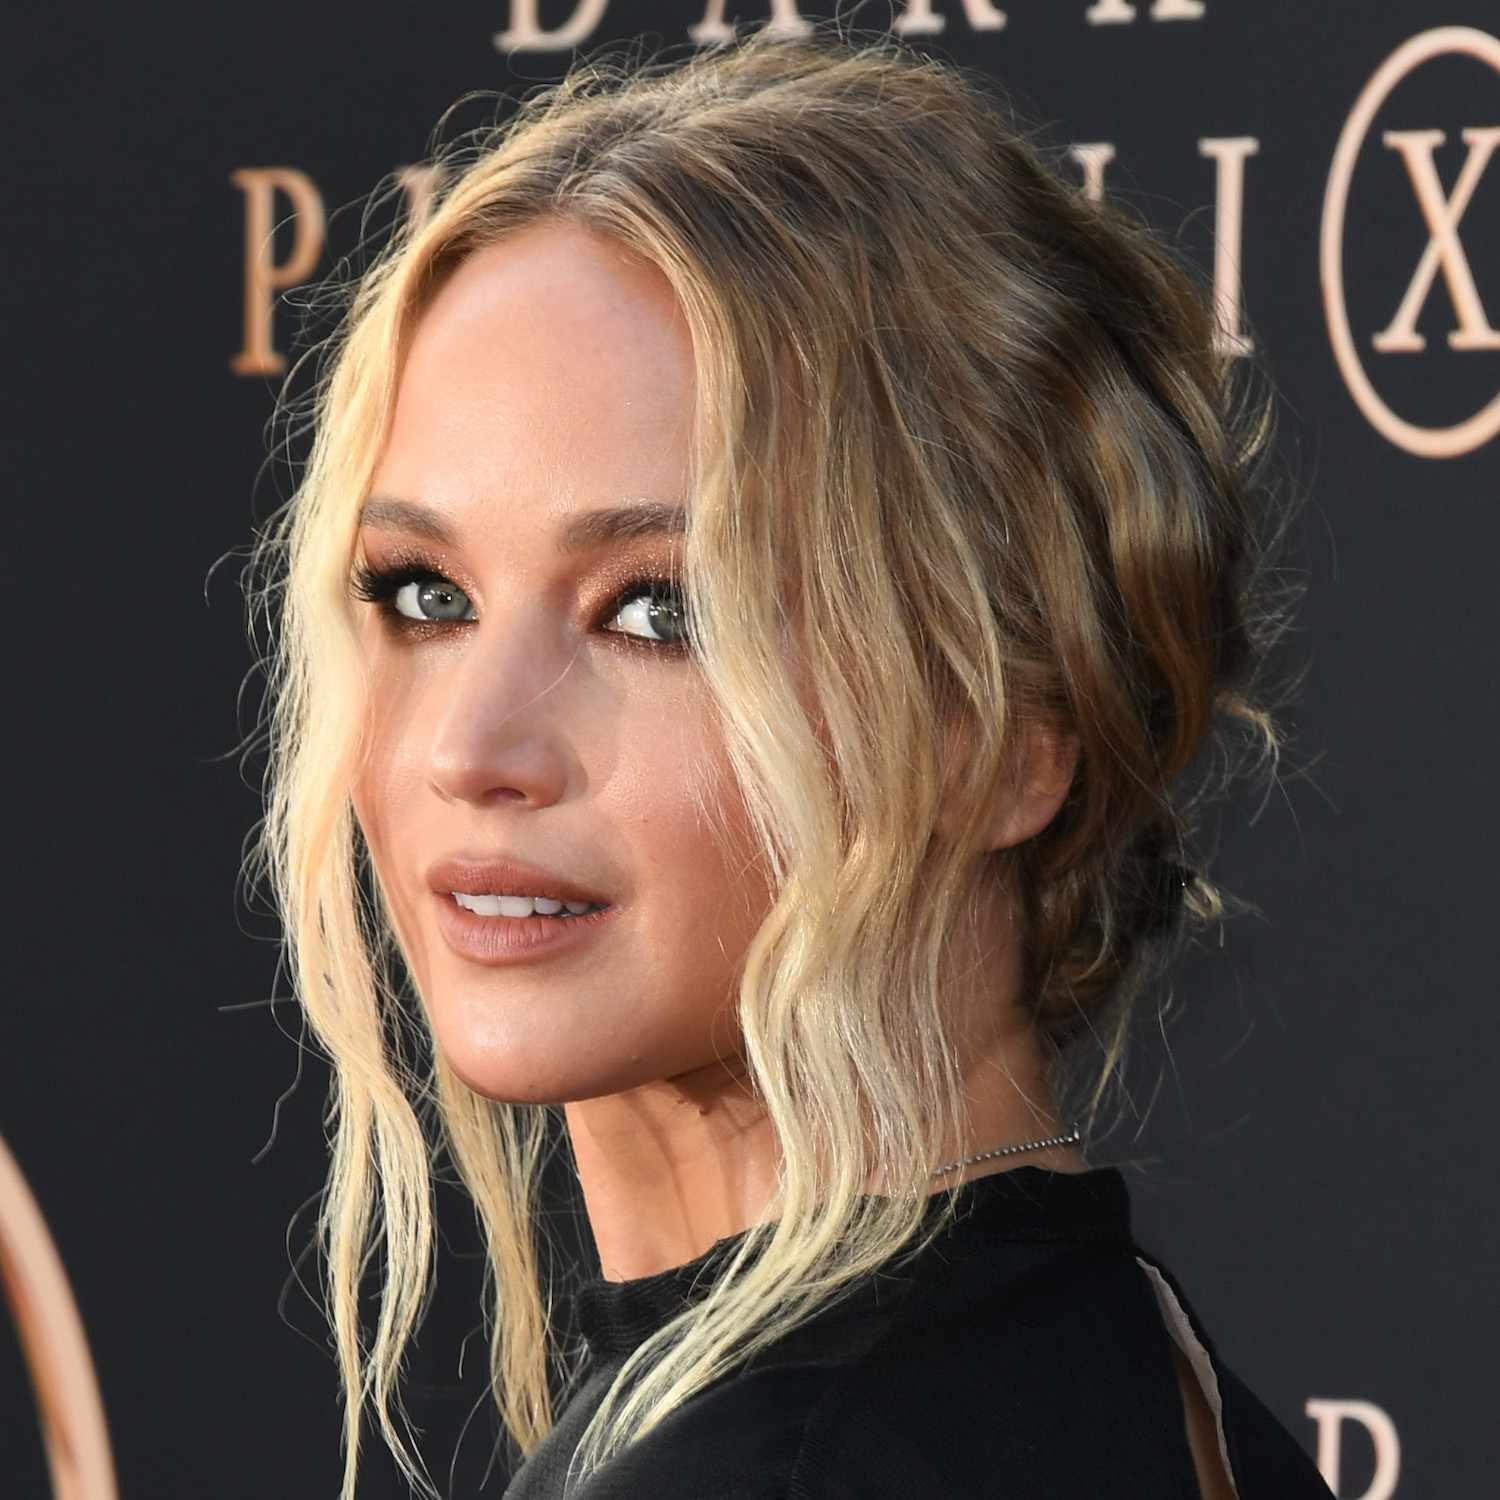 Jennifer Lawrence wears a low bun hairstyle with wavy face-framing pieces and shimmery eyeshadow